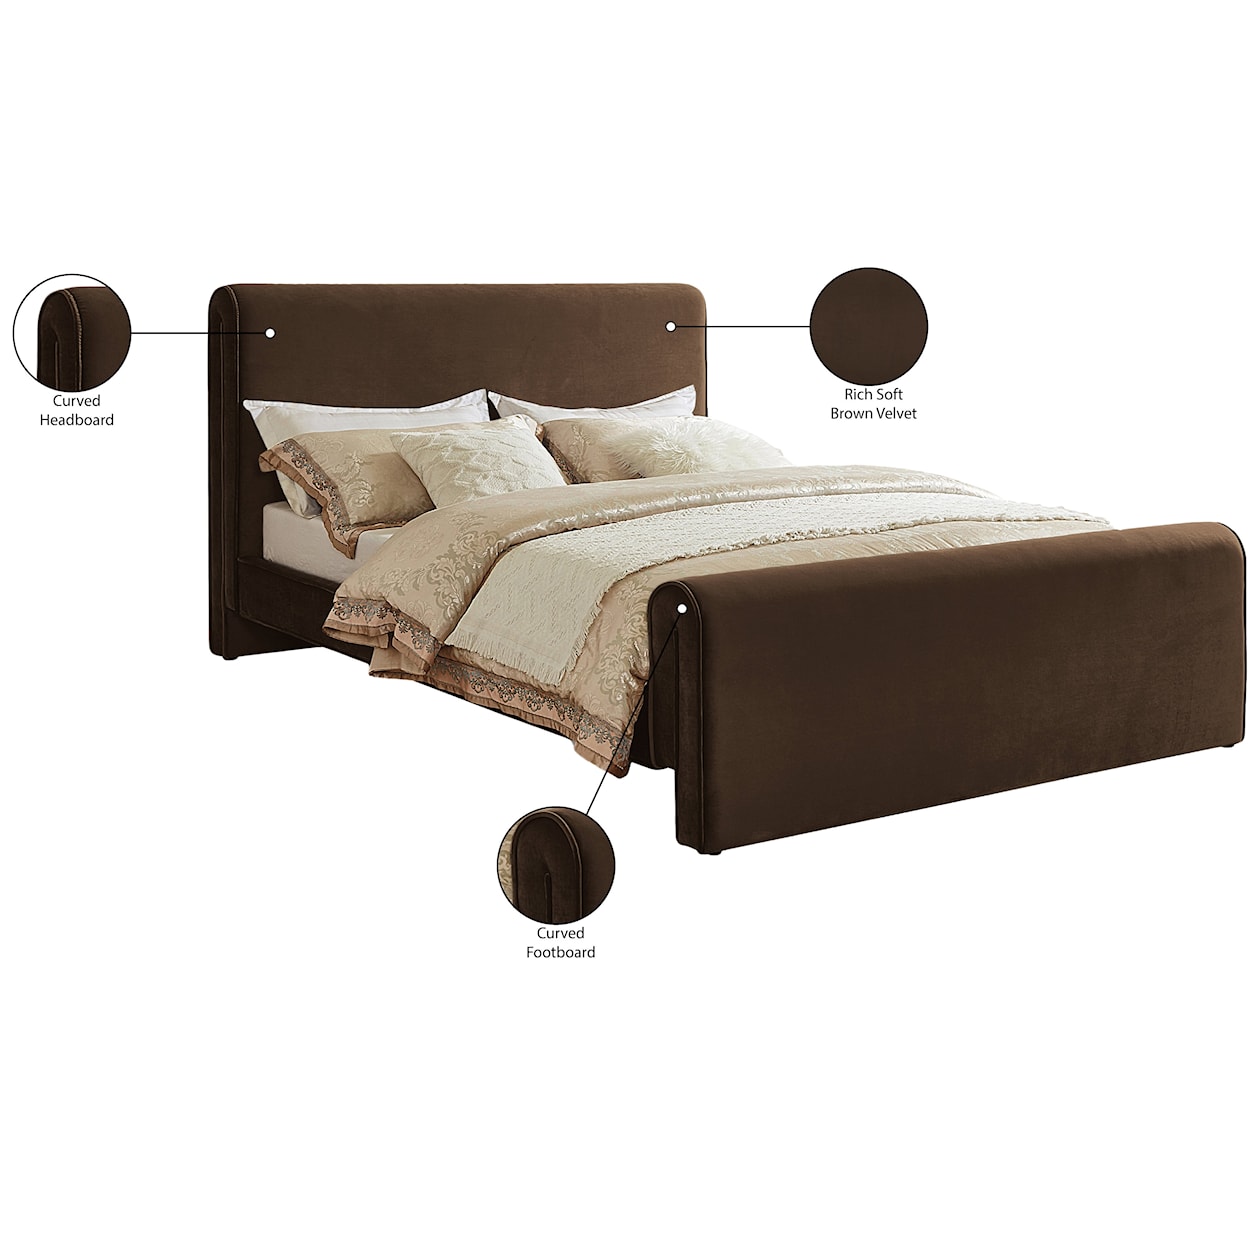 Meridian Furniture Sloan Queen Bed (3 Boxes)